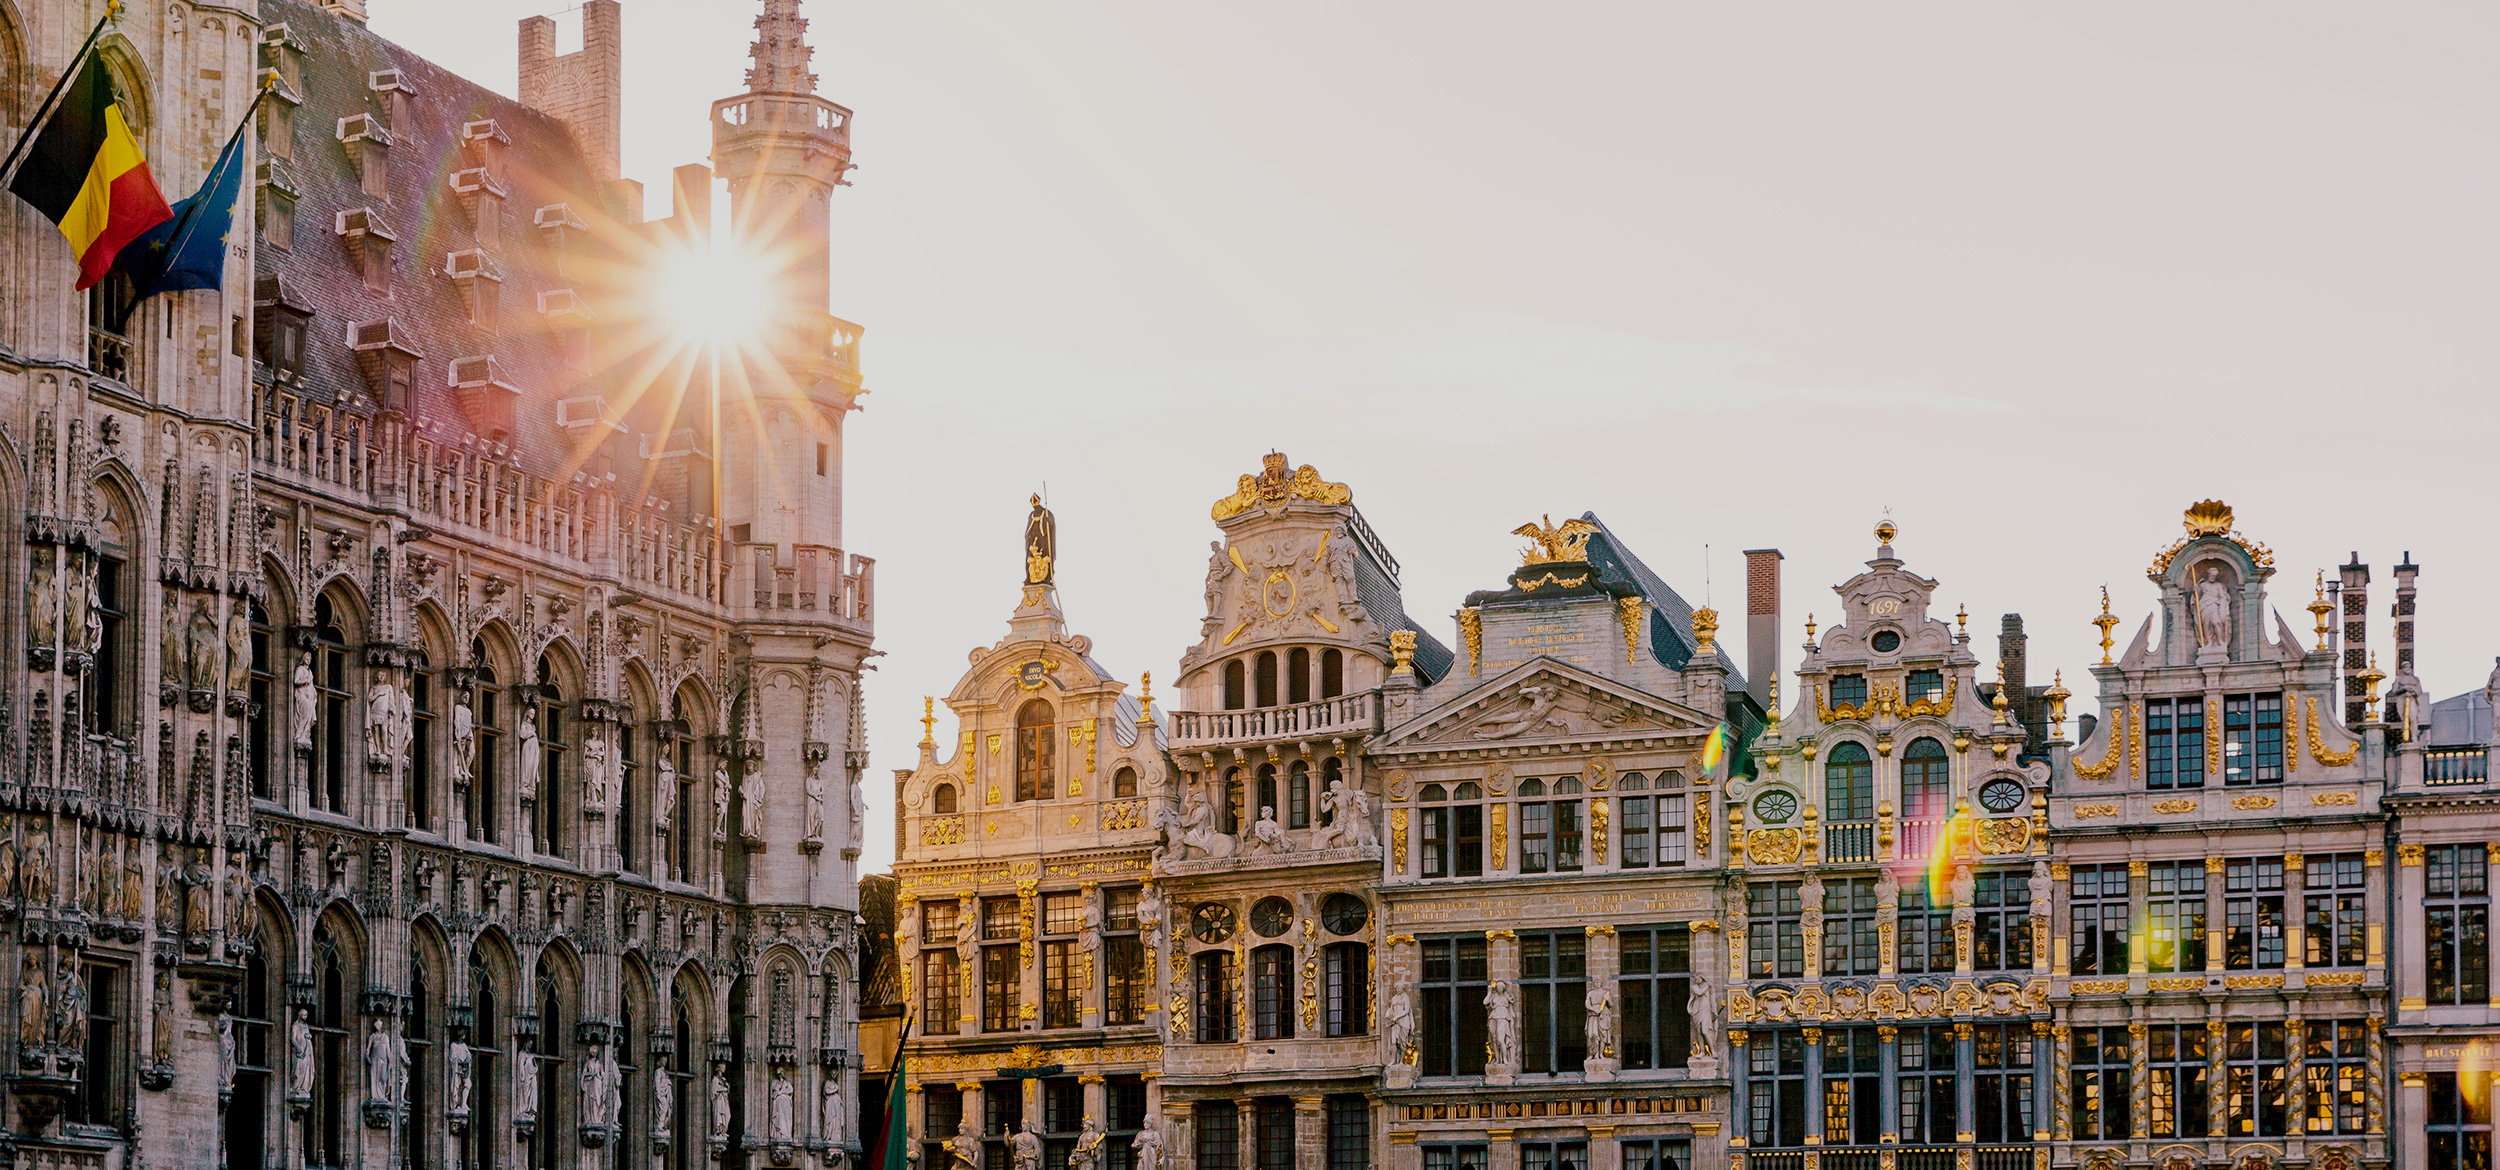 Sun shining through historic buildings at the Grand Place square in Brussels, Belgium.